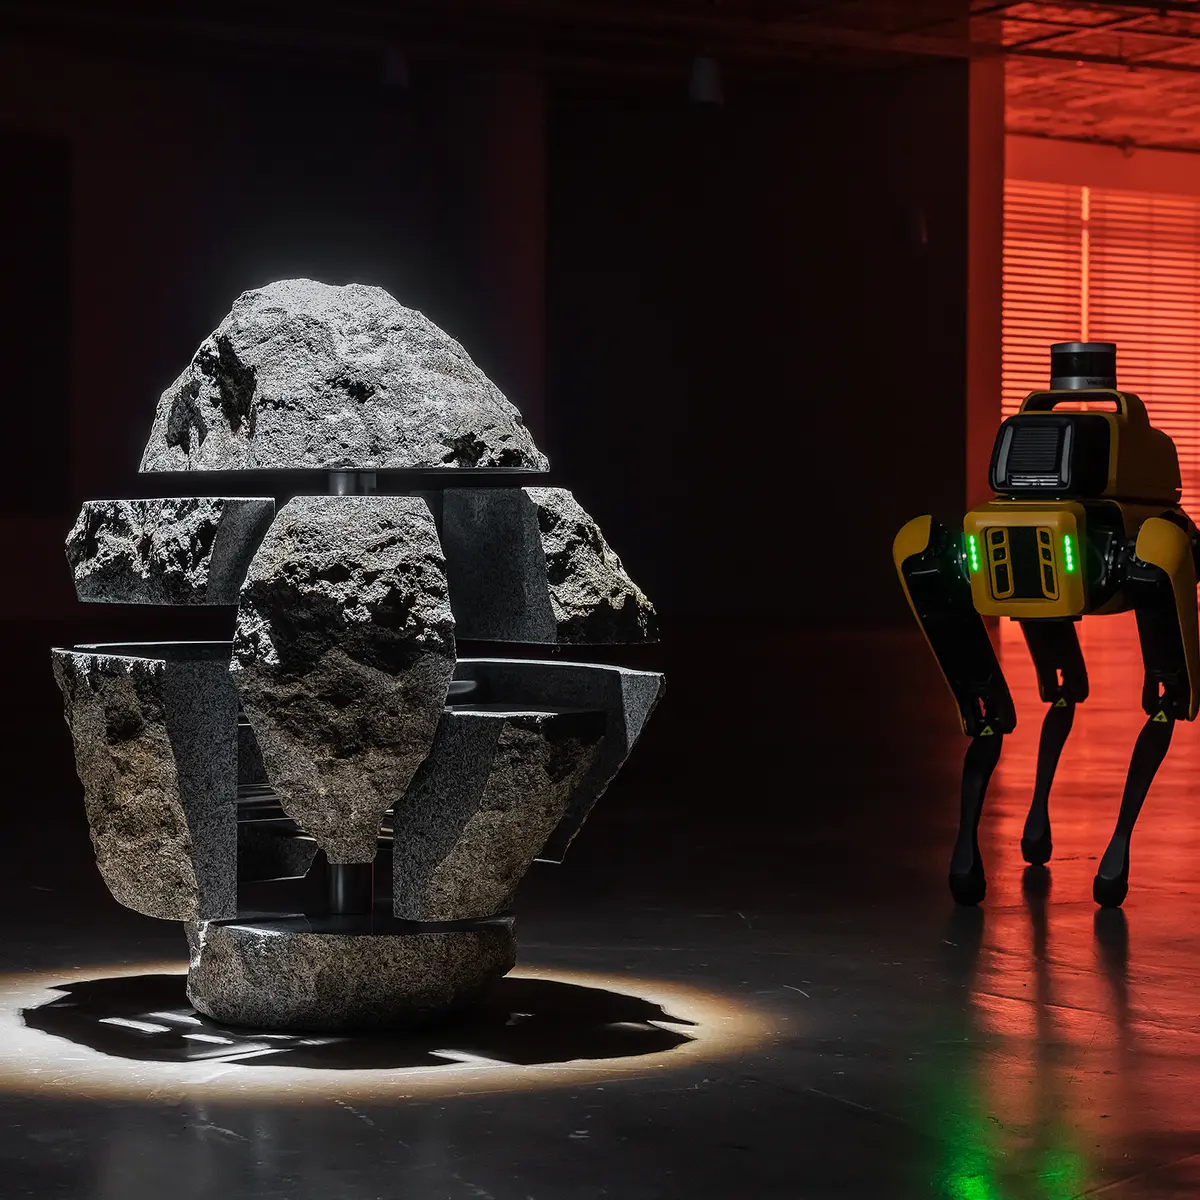 A four-legged robot examines a rock puzzle installation, bathed in the glow of an atmospheric red light in the background.